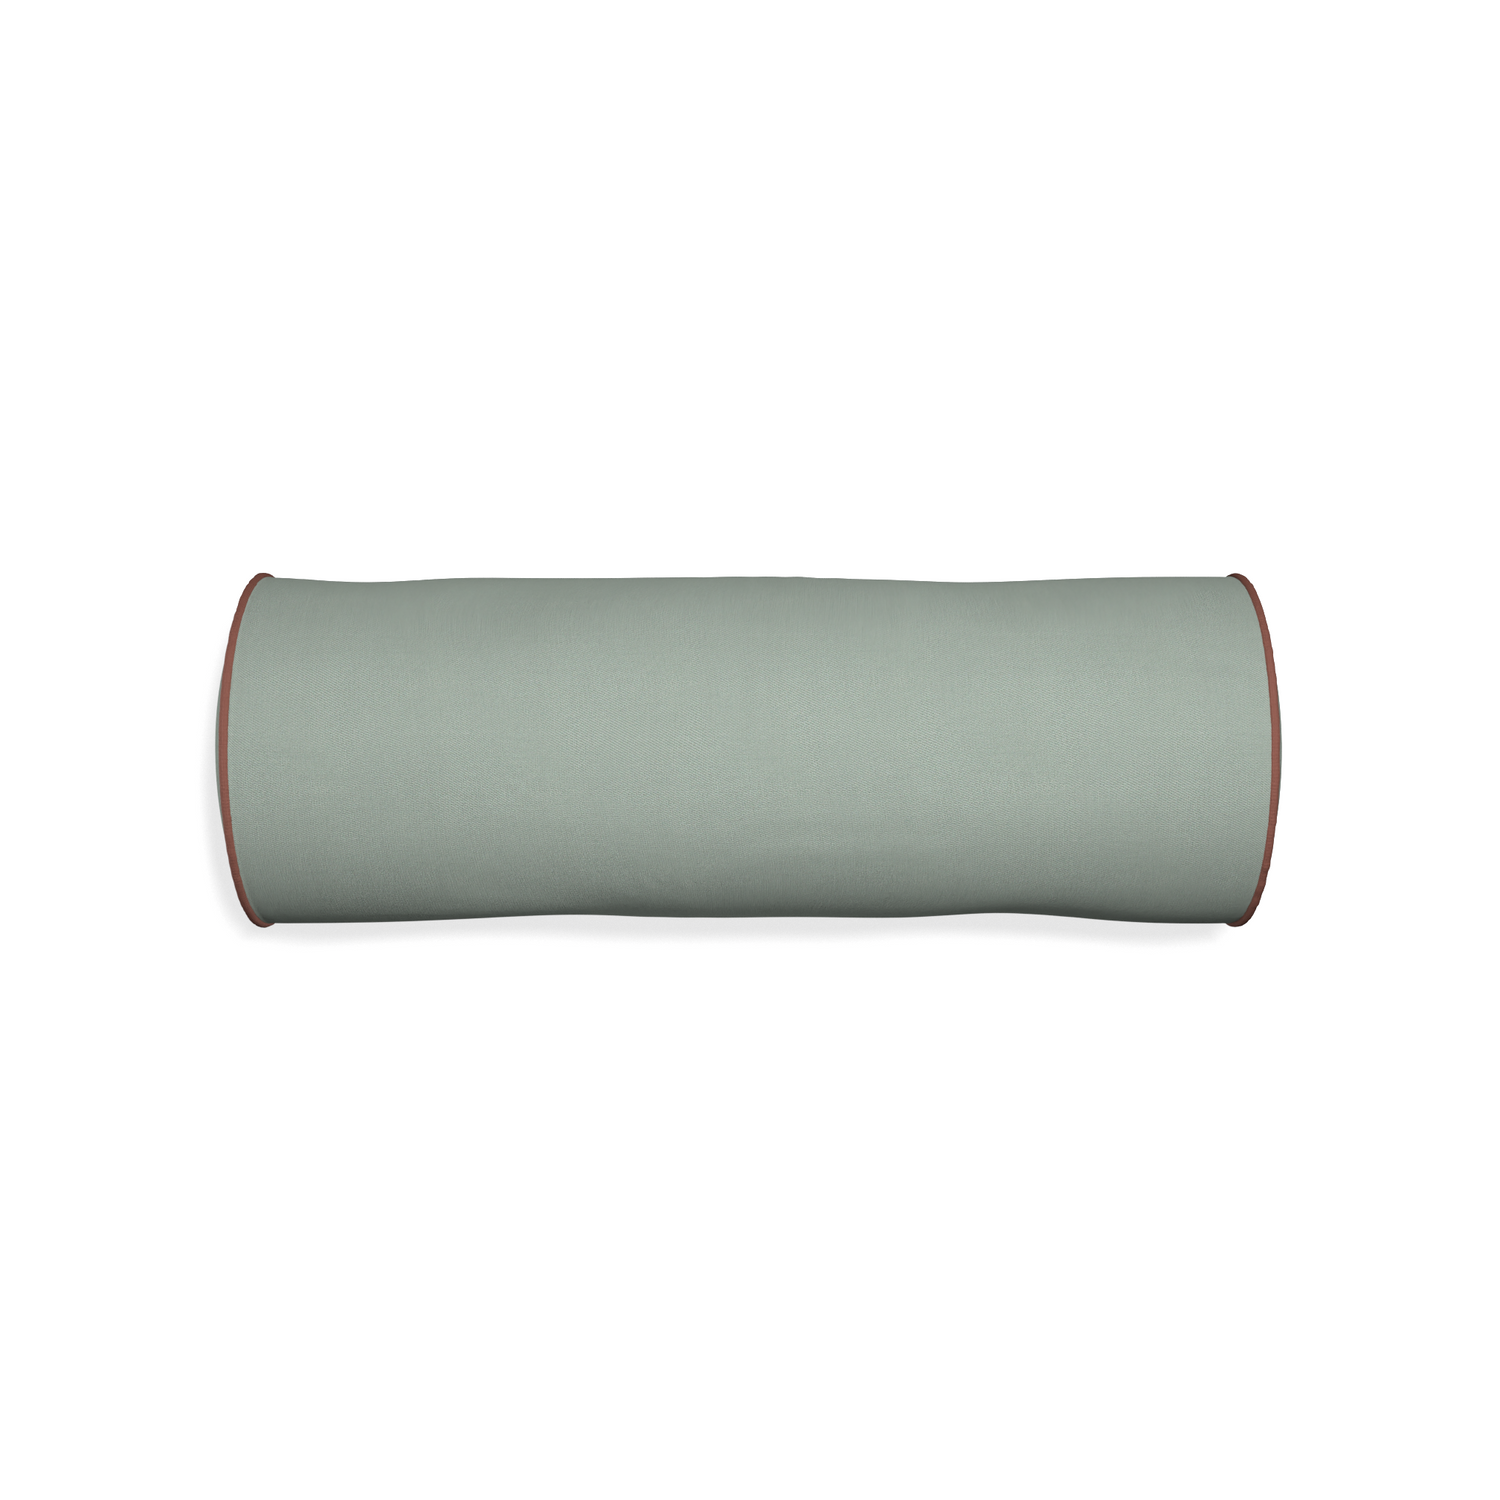 Bolster sage custom sage green cottonpillow with w piping on white background